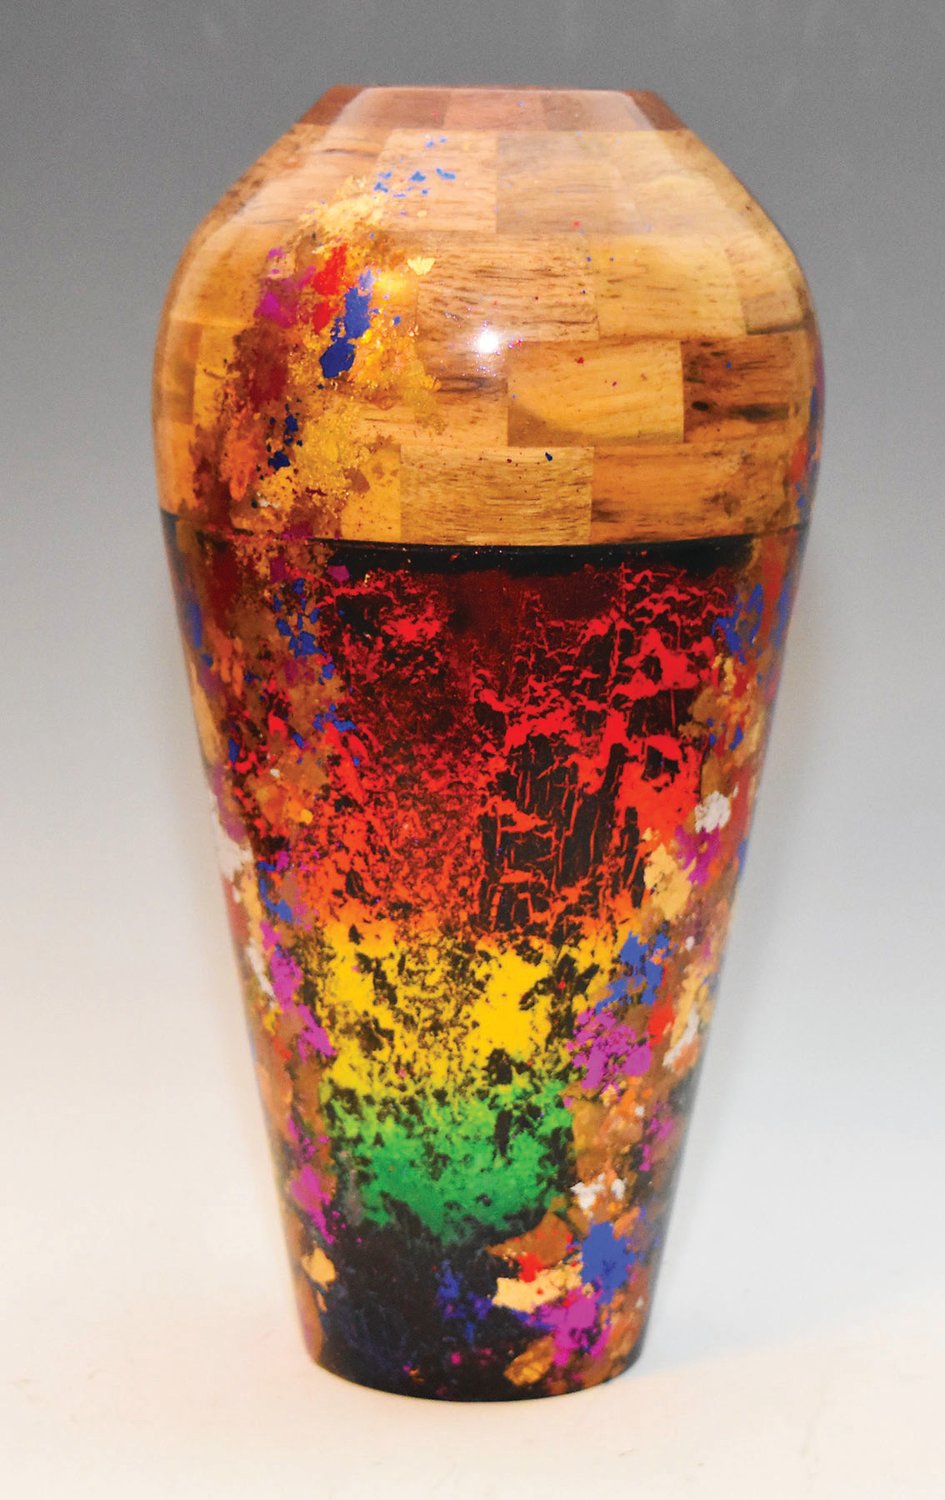 Bill Abendroth’s “Over the Rainbow” turned vessel.